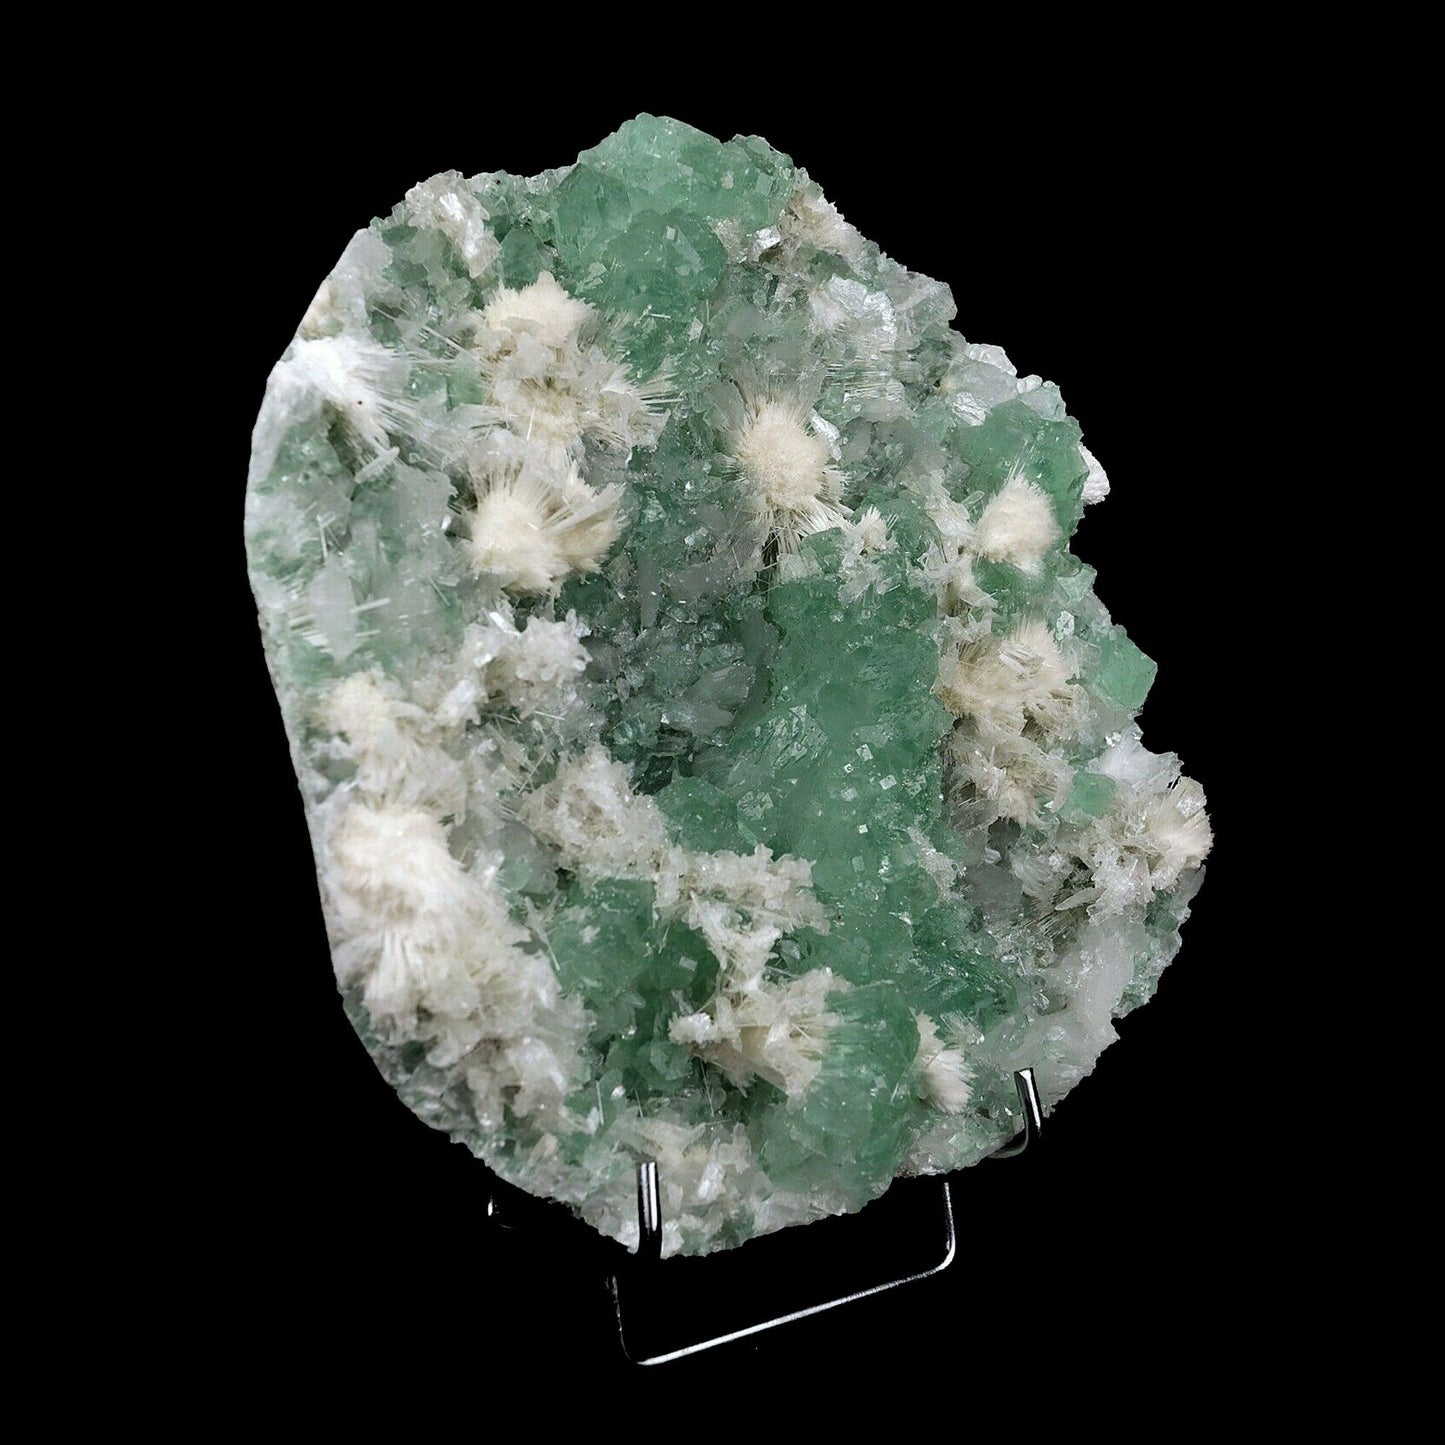 Apophyllite Green with Scolecite on Chalcedony Natural Mineral Specime…  https://www.superbminerals.us/products/apophyllite-green-with-scolecite-on-chalcedony-natural-mineral-specimen-b-3742  Features:This is worthy of center piece status in any mineral collection. Its first feature is size - a whopping 20 by 18 cm and 2.00 kg which qualifies it for that rare super extra large status which Mineralium specializes in. The next feature is sculptural snowy white needle-like scolecite which forms radiating